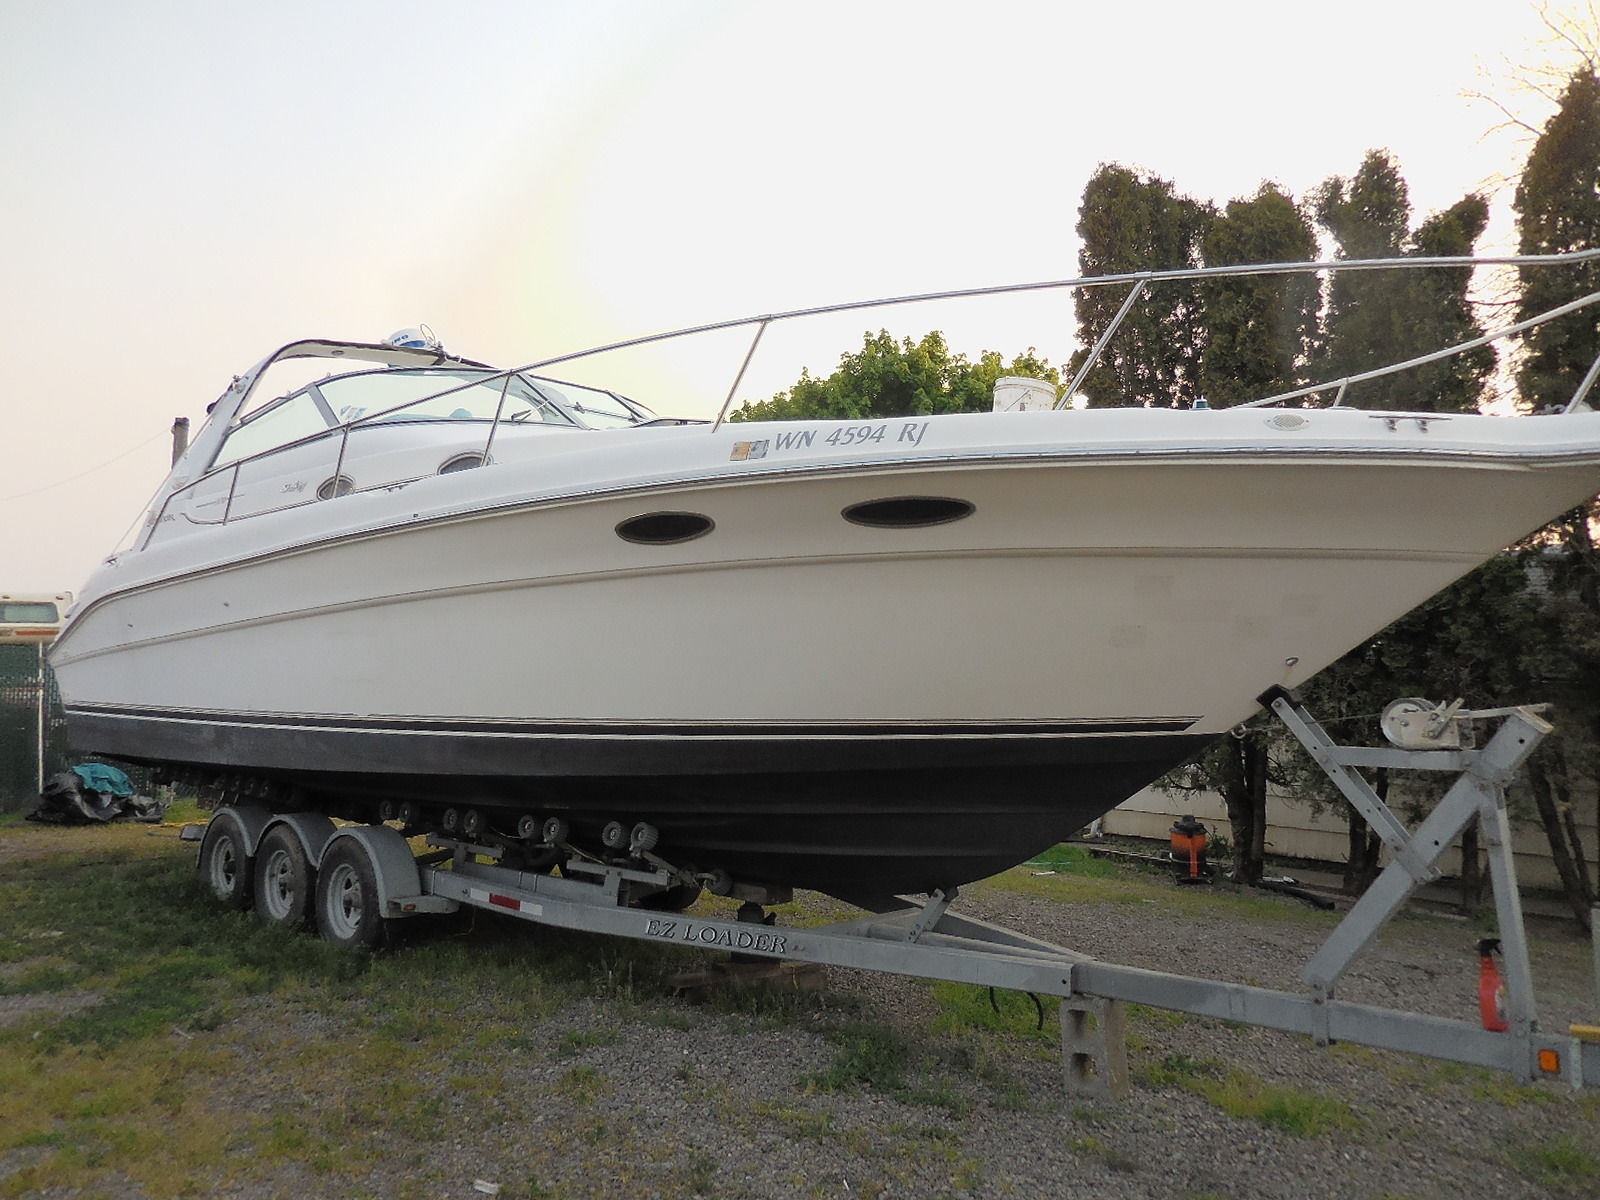 Sea Ray Sundancer 330 Twin V8 Boat With Low Hours 34' Very 84 Hours Gen